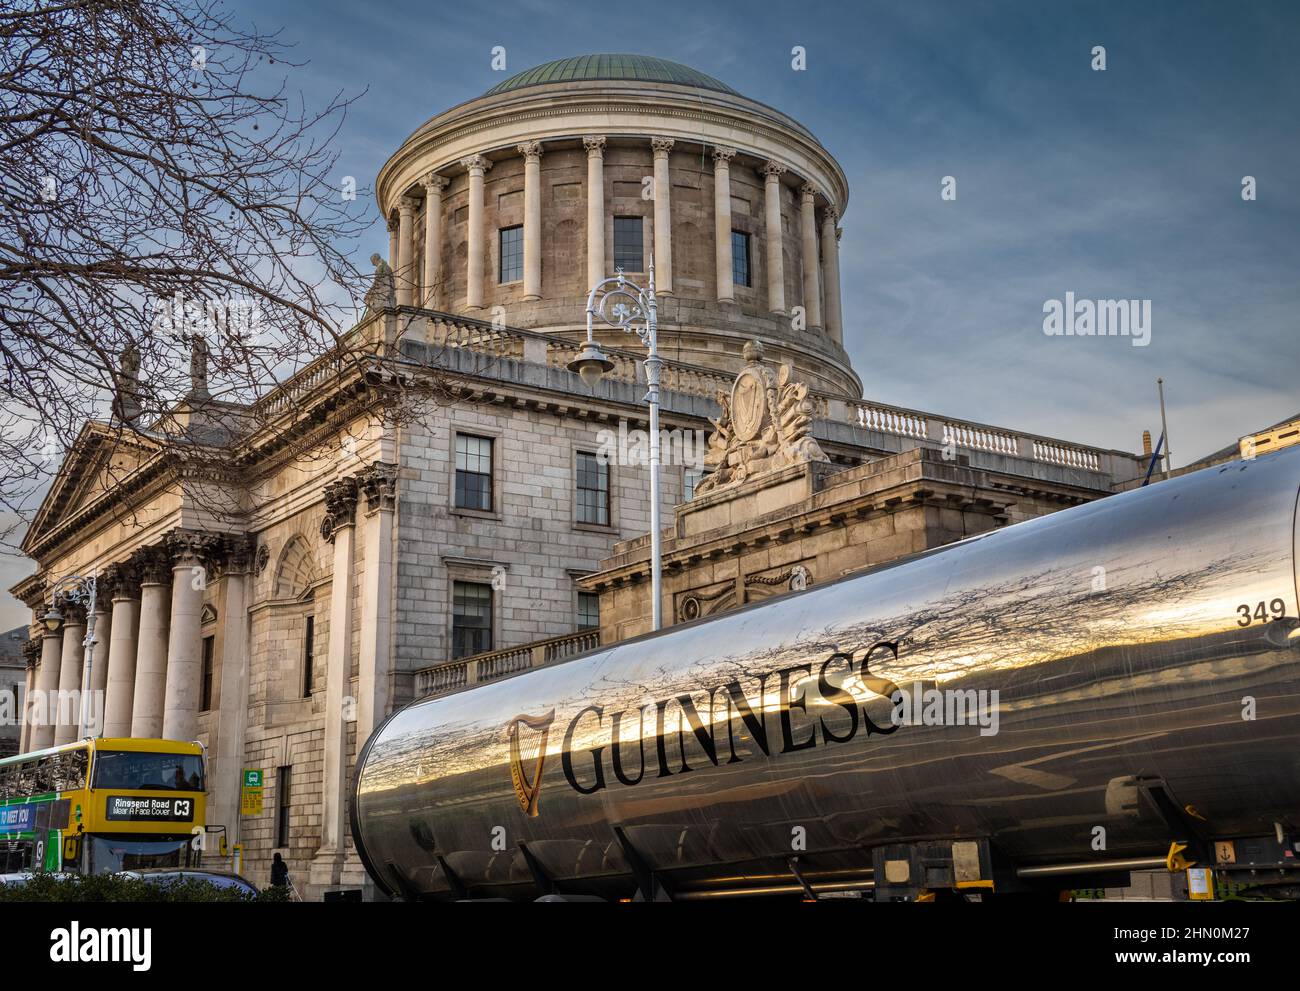 A Guinness beer tanker outside the historic Four Courts building on Inns Quay next to the River Liffey in Dublin, Ireland.  The Four Courts (Irish: Na Stock Photo